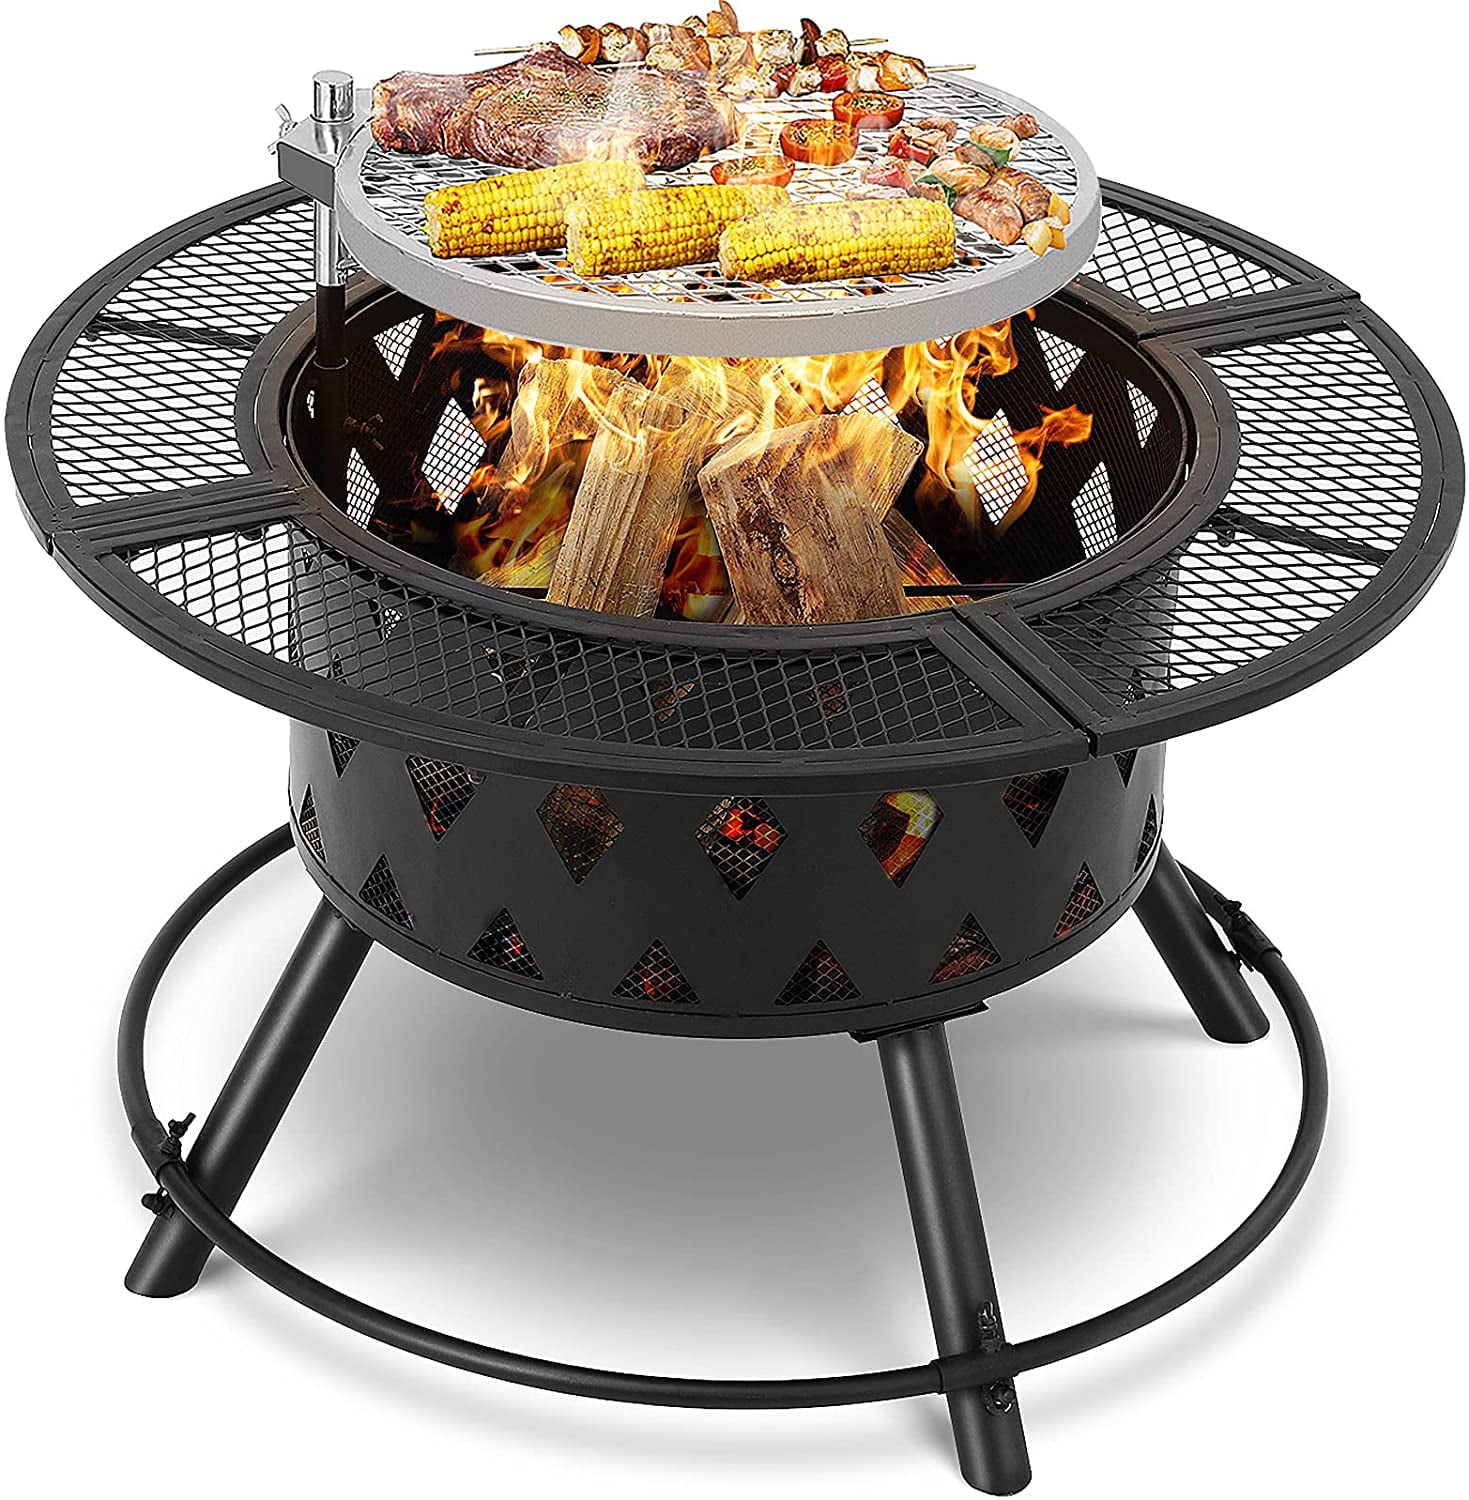 Gartio 36 Wood Burning Fire Pit Bowl, Square Fire Pit Insert With Cooking Grate